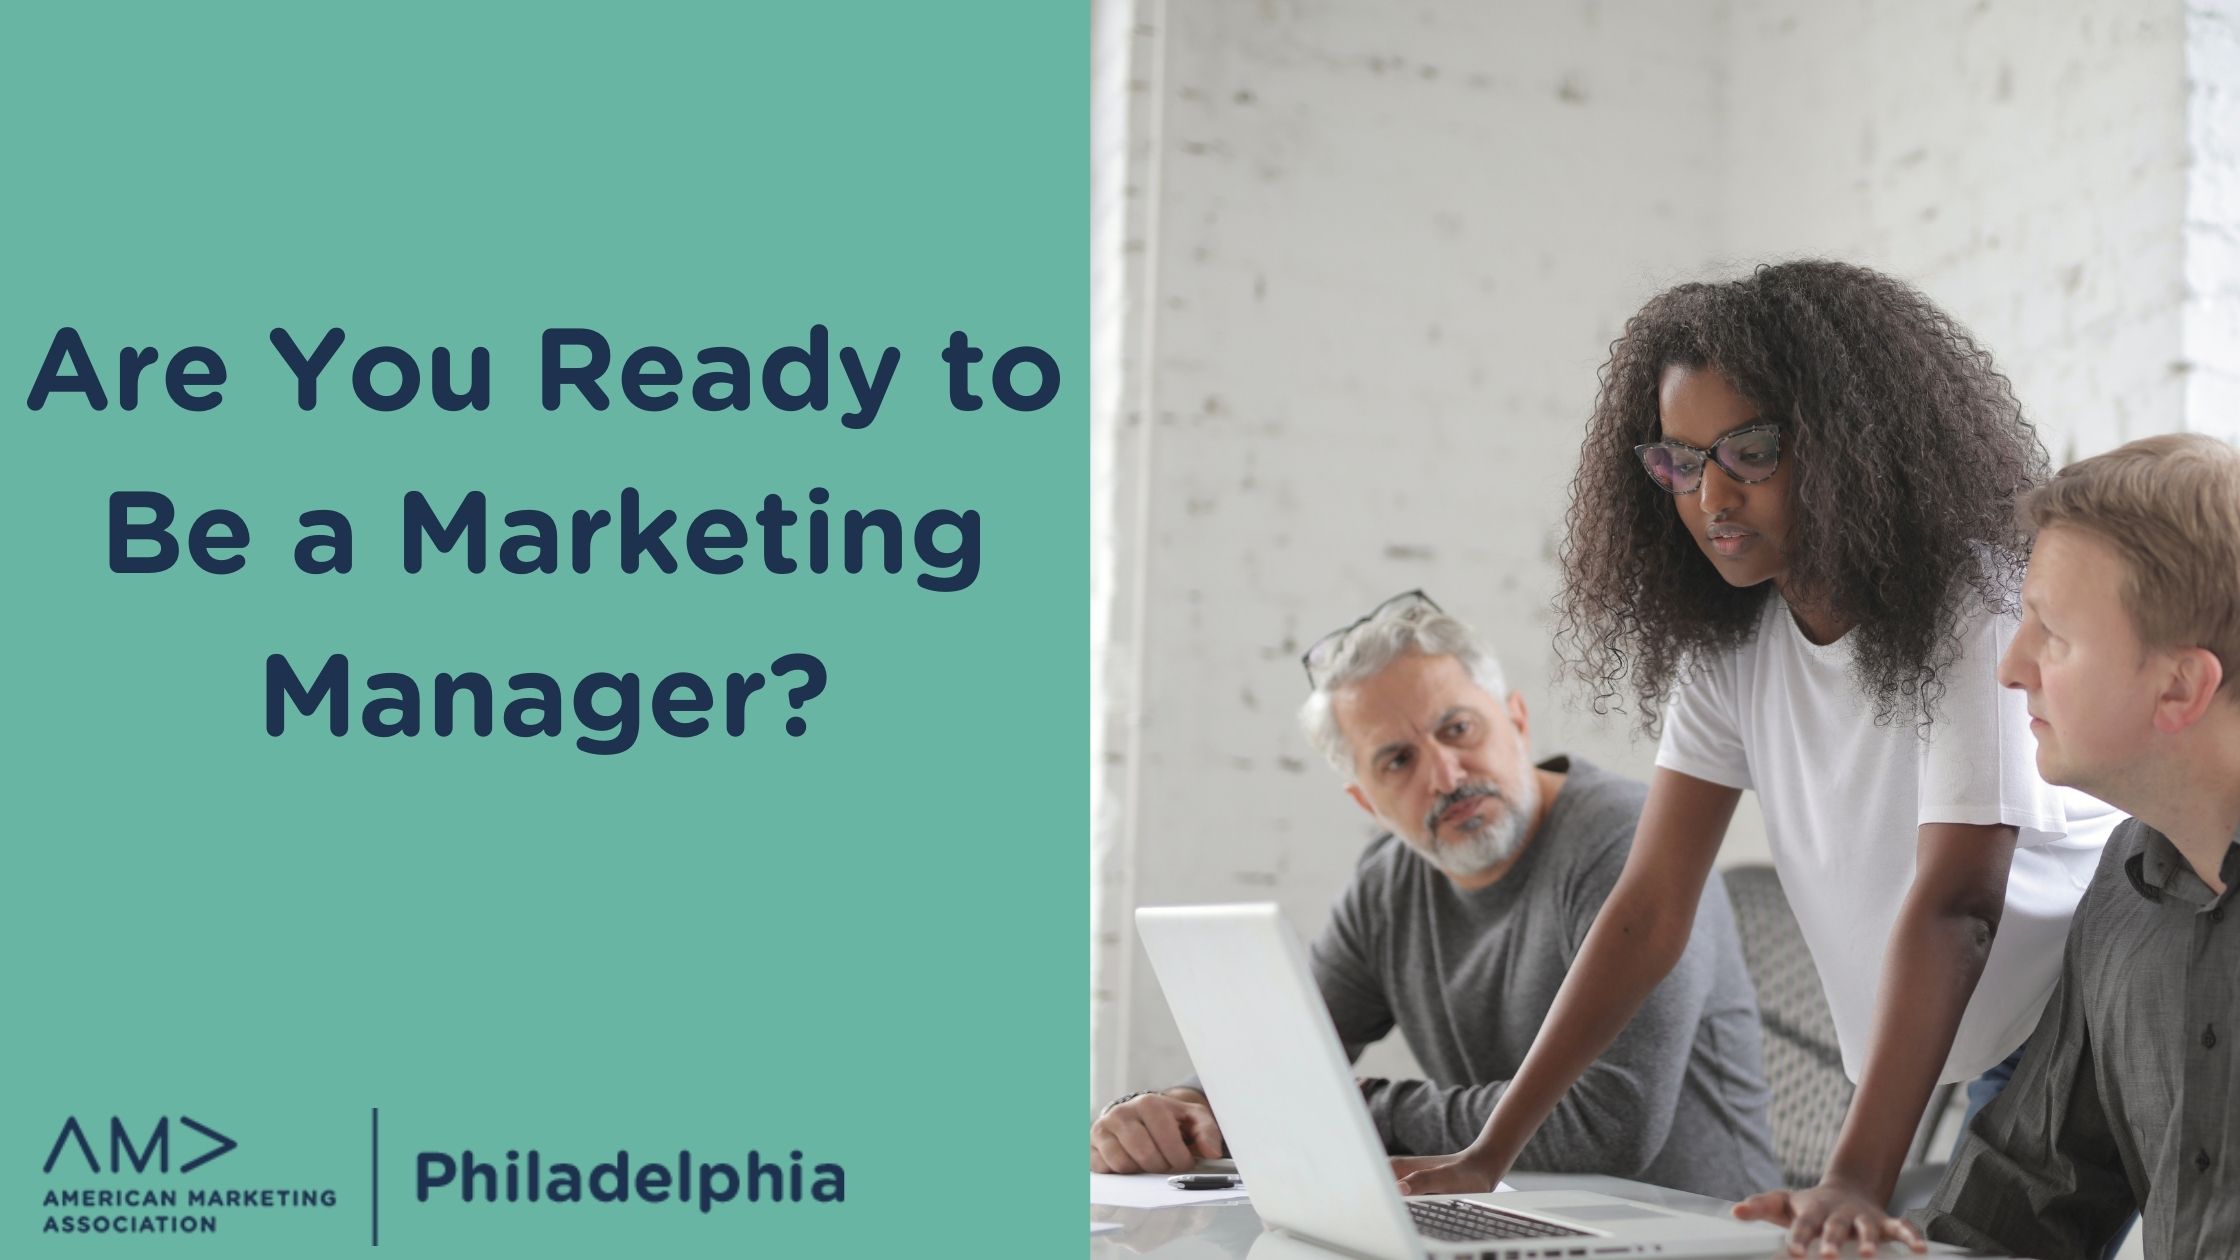 Are You Ready To Be A Marketing Manager?